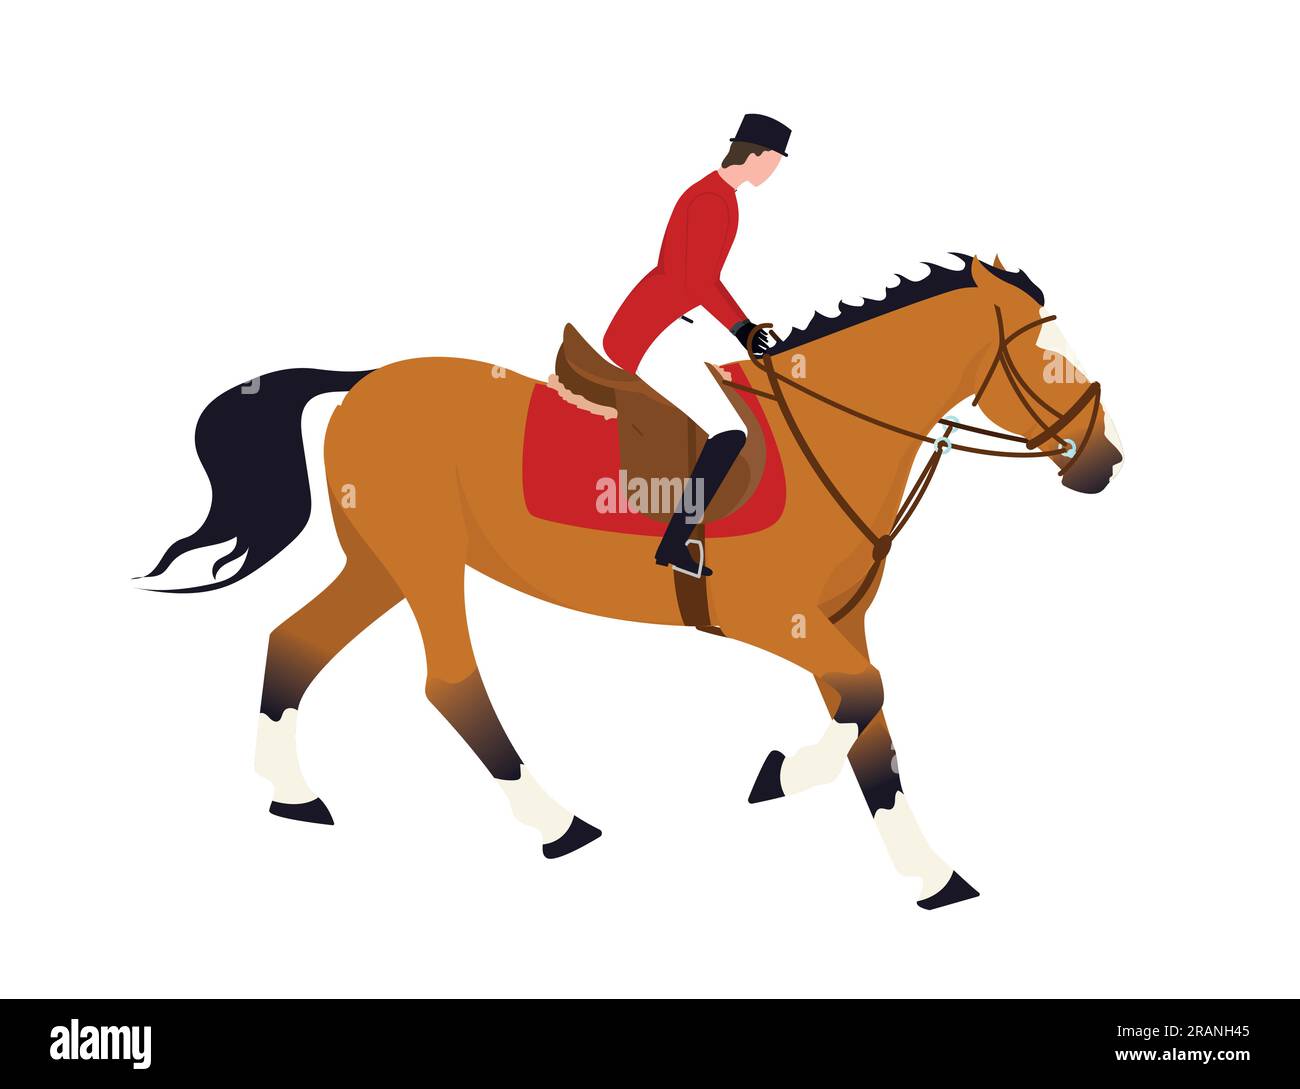 A horseman on a horse. Illustration of a jockey riding a horse. Illustration of a man riding a stallion. Image of a rider on a horse Stock Vector